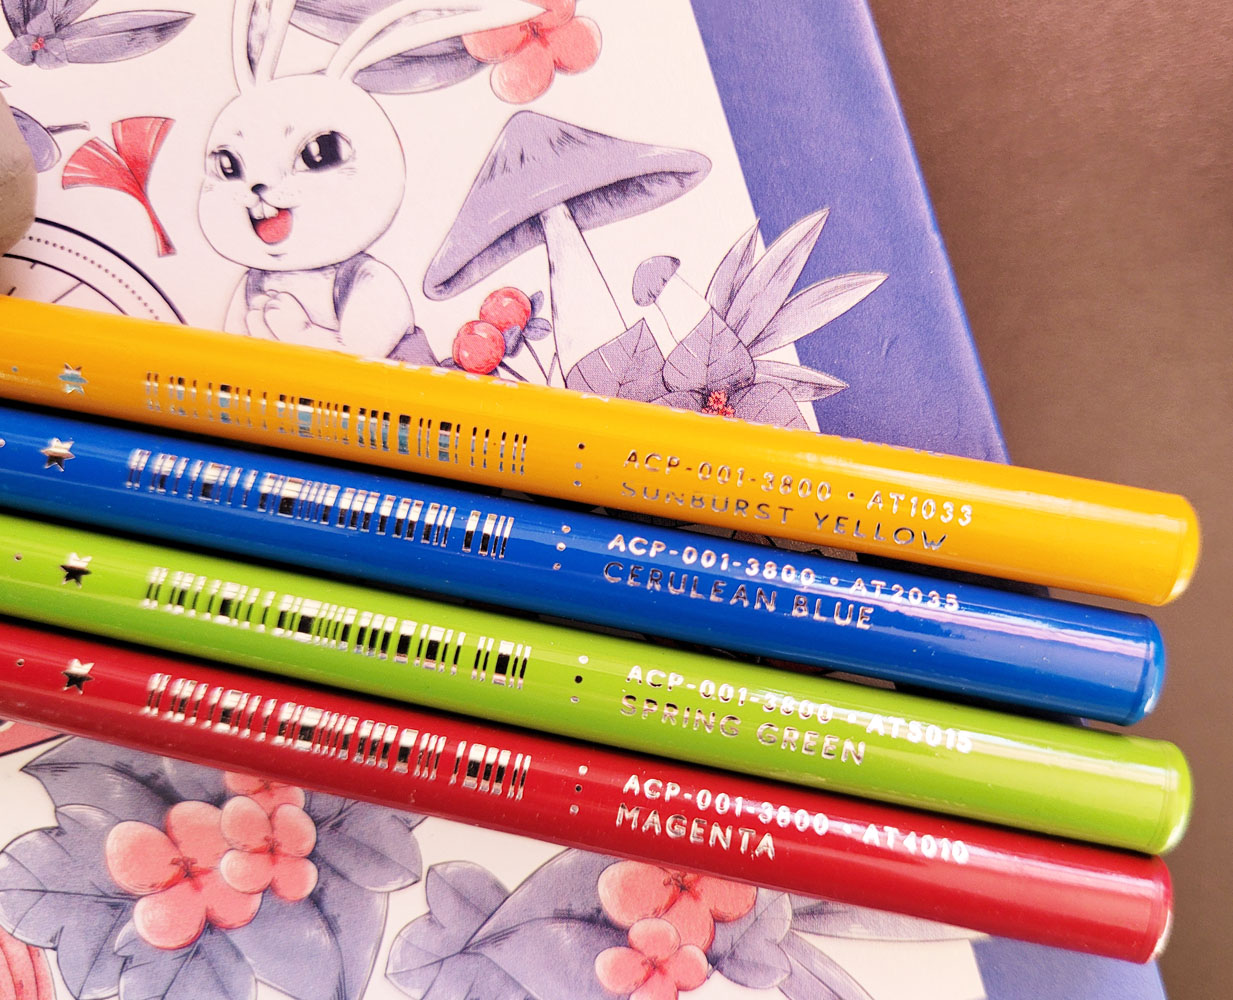 Fueled by Clouds & Coffee: Review: Arrtx Colored Pencils